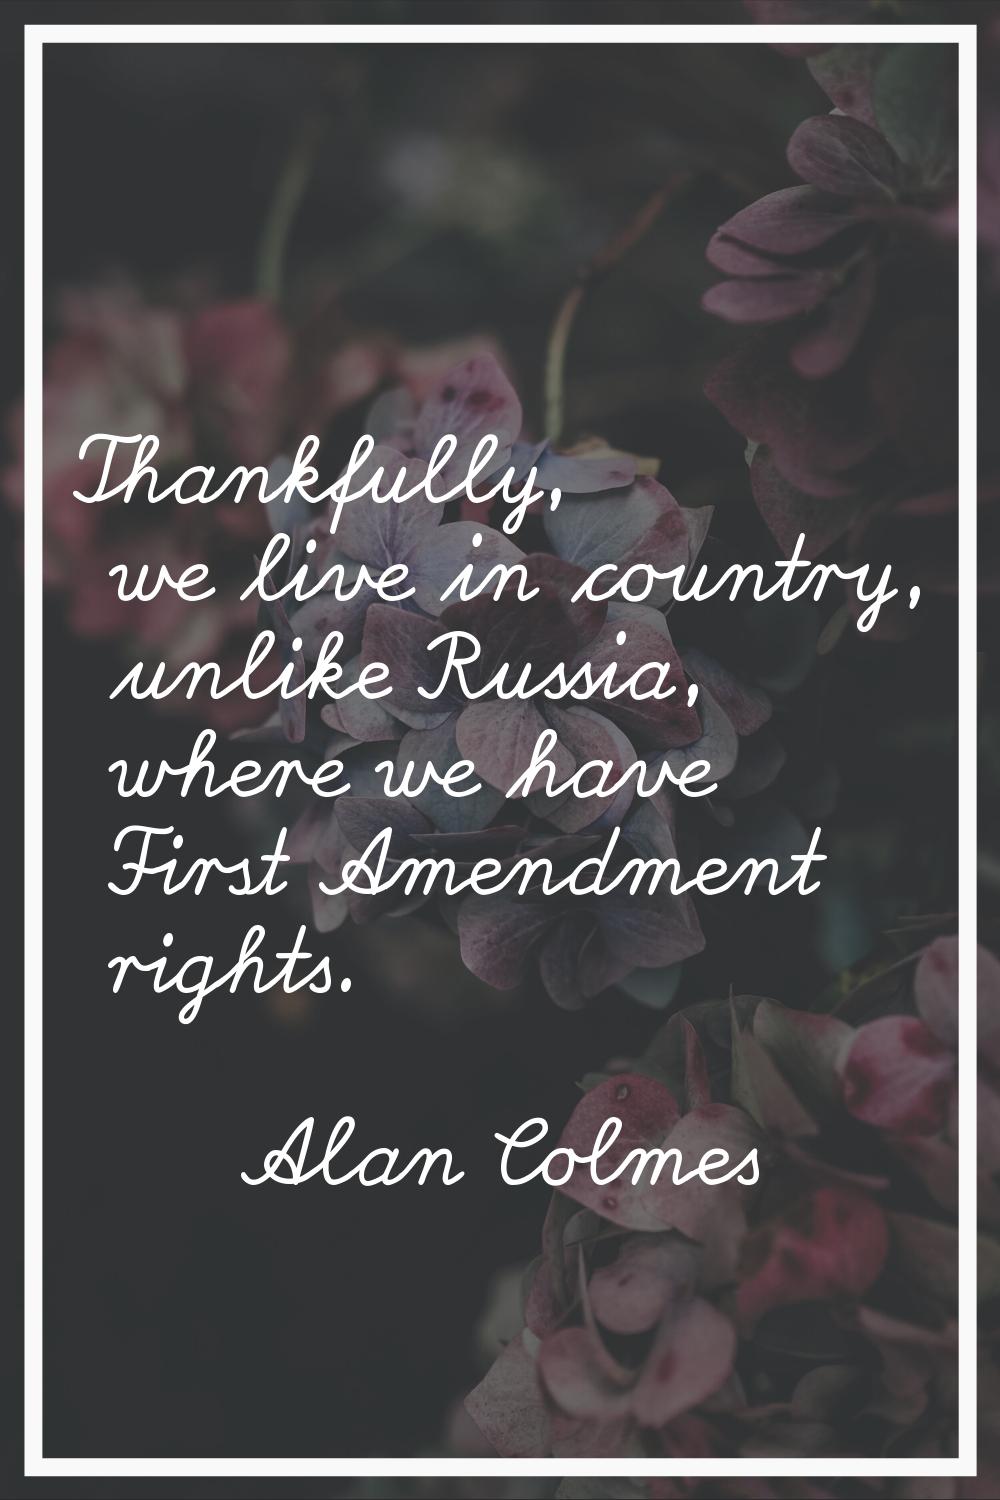 Thankfully, we live in country, unlike Russia, where we have First Amendment rights.